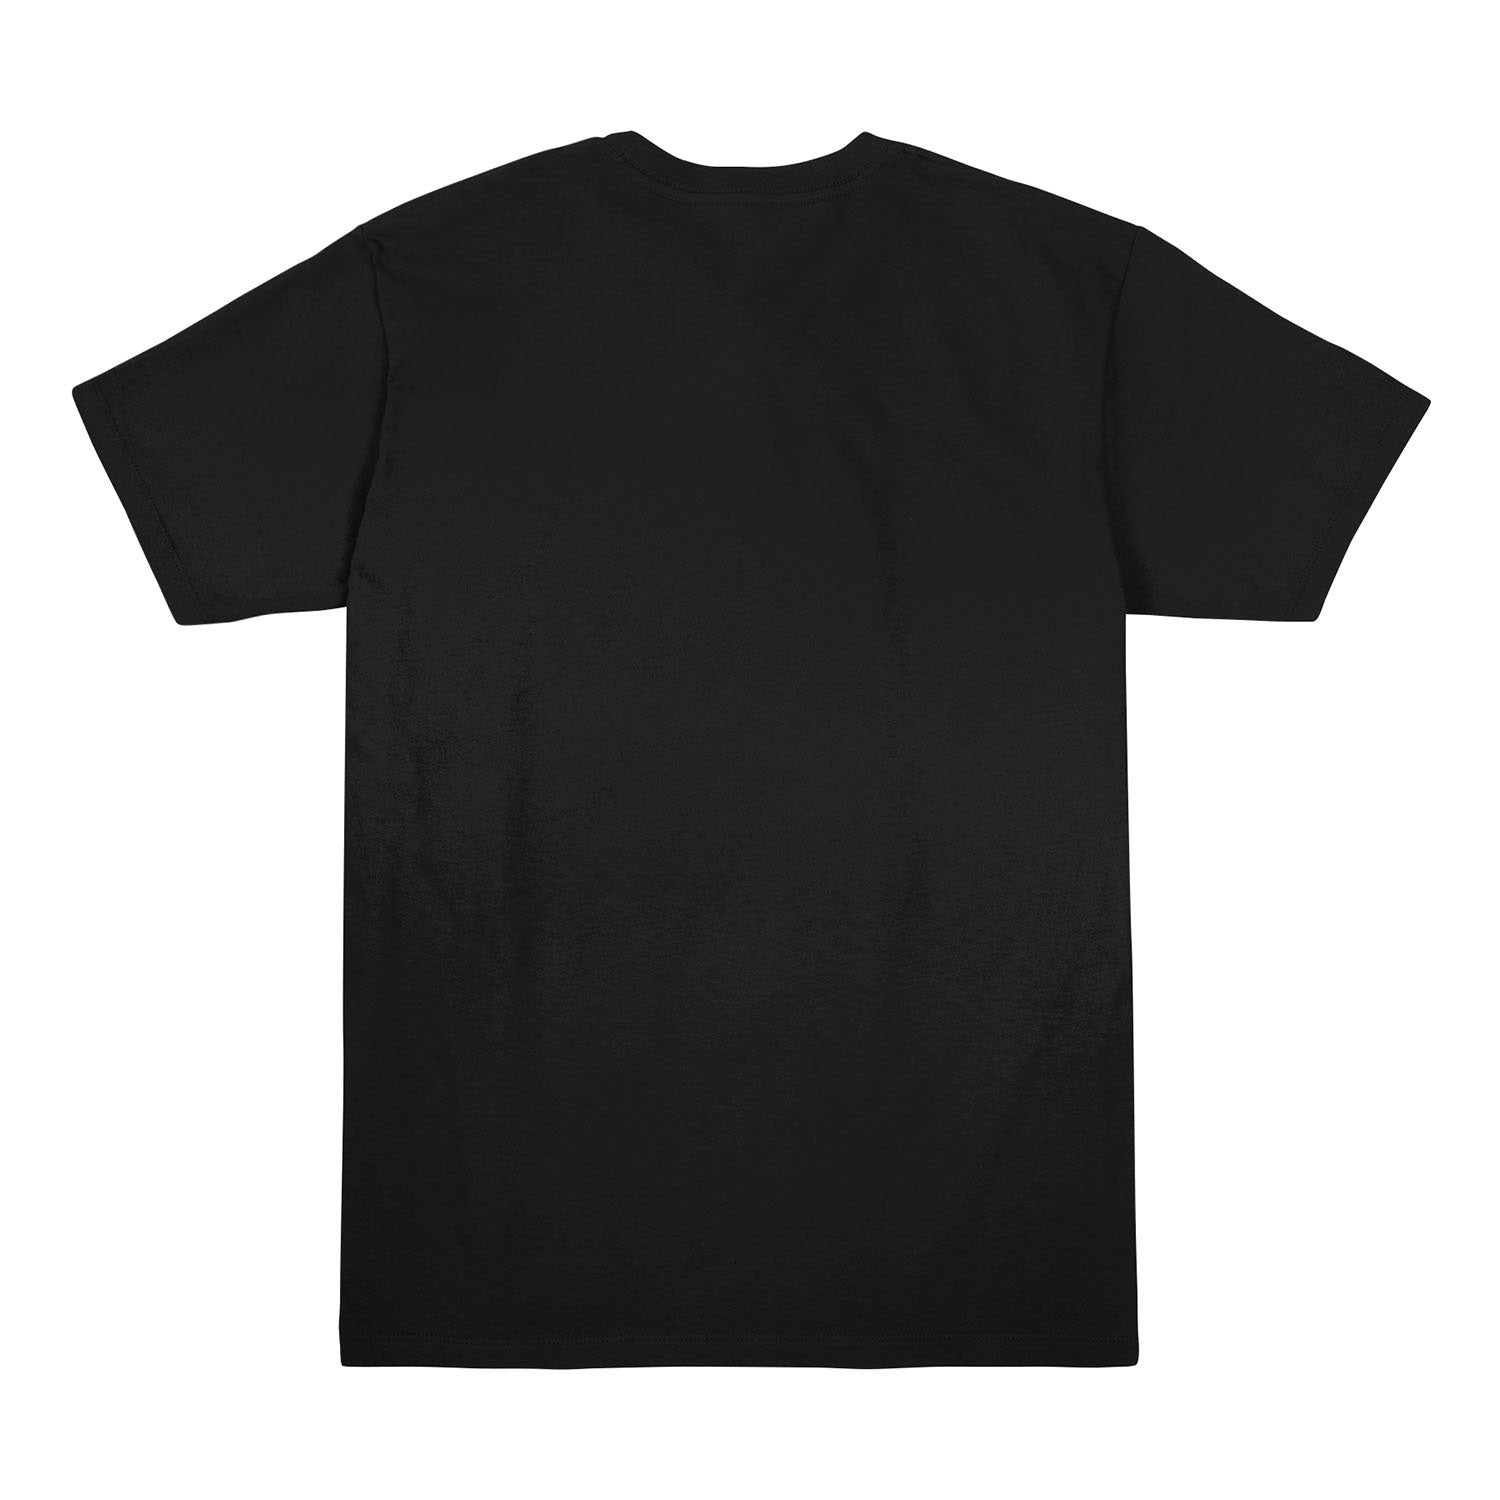 Call of Duty Rust Black T-Shirt - Call of Duty Store